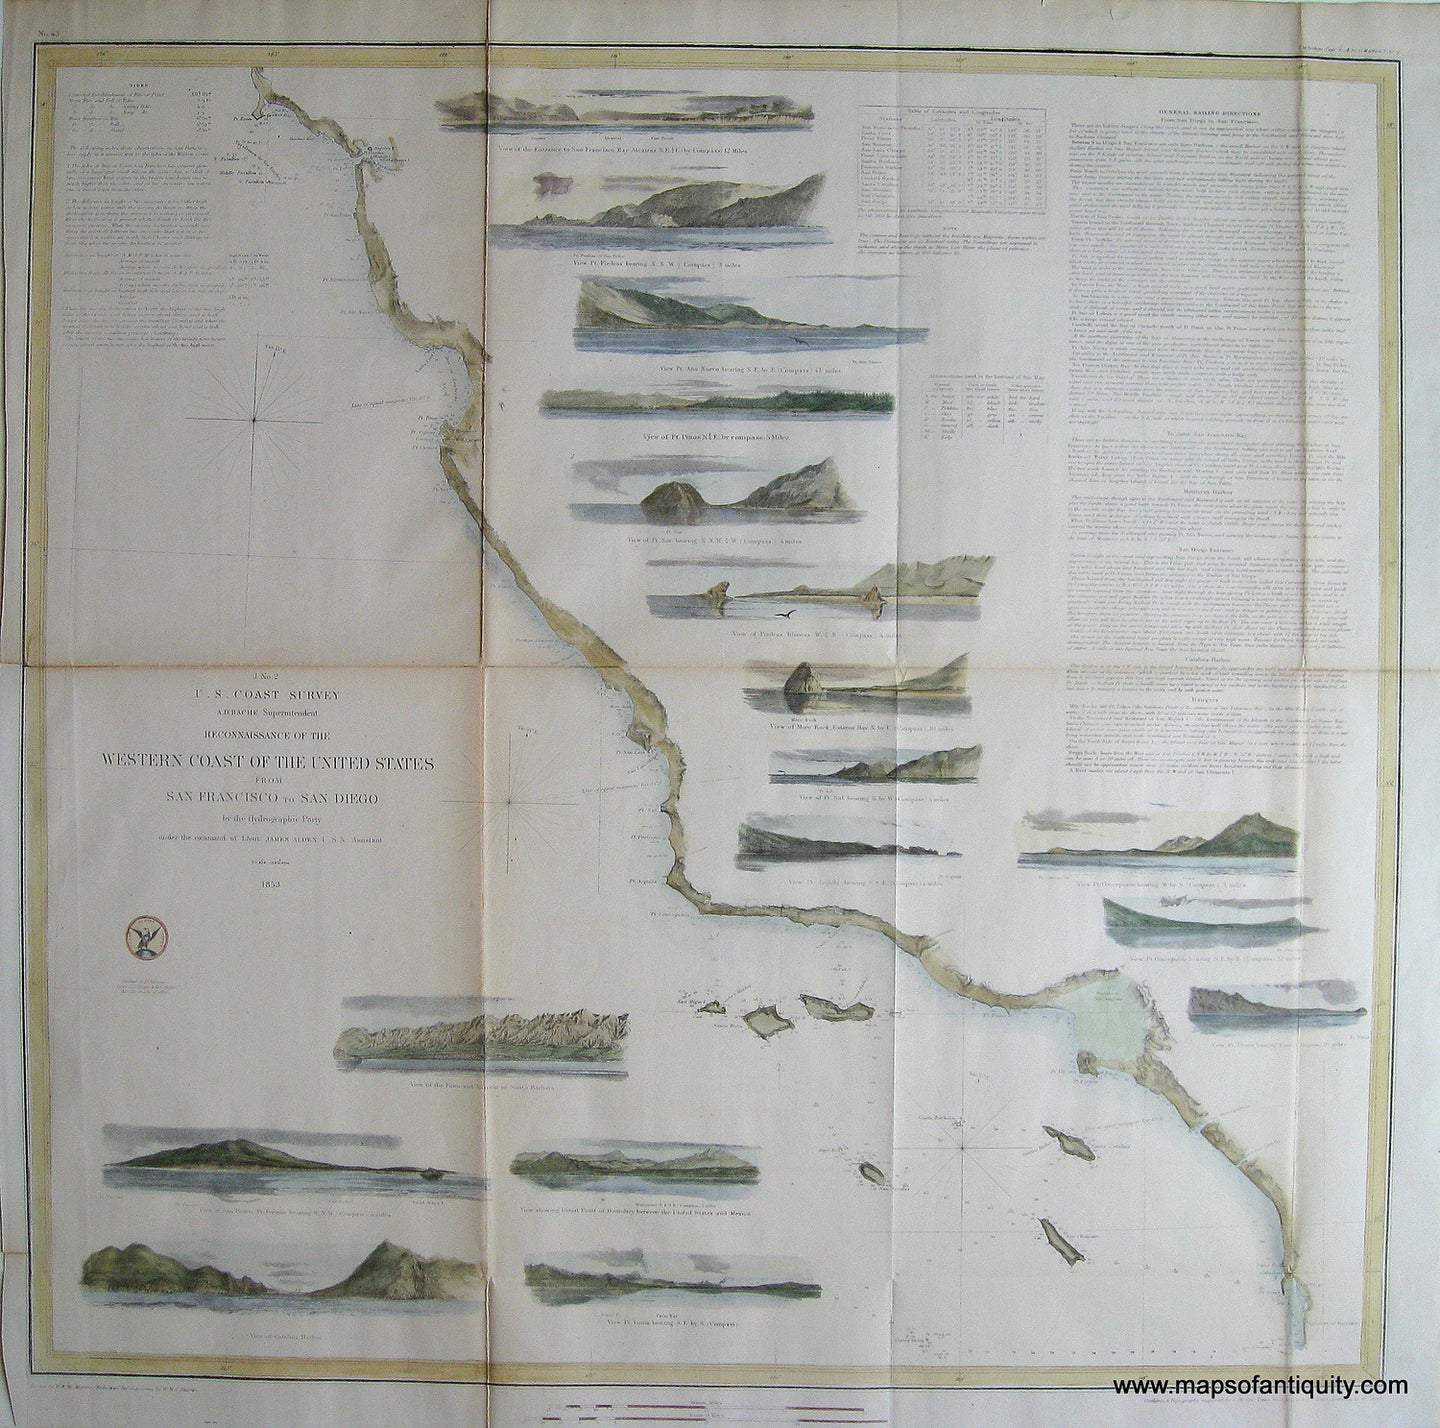 Hand-Colored-Antique-Coastal-Chart-Reconnaissance-of-the-Western-Coast-of-the-United-States-Middle-Sheet-from-San-Francisco-to-San-Diego.-**********-United-States-West-1854-U.S.C.S.-Maps-Of-Antiquity